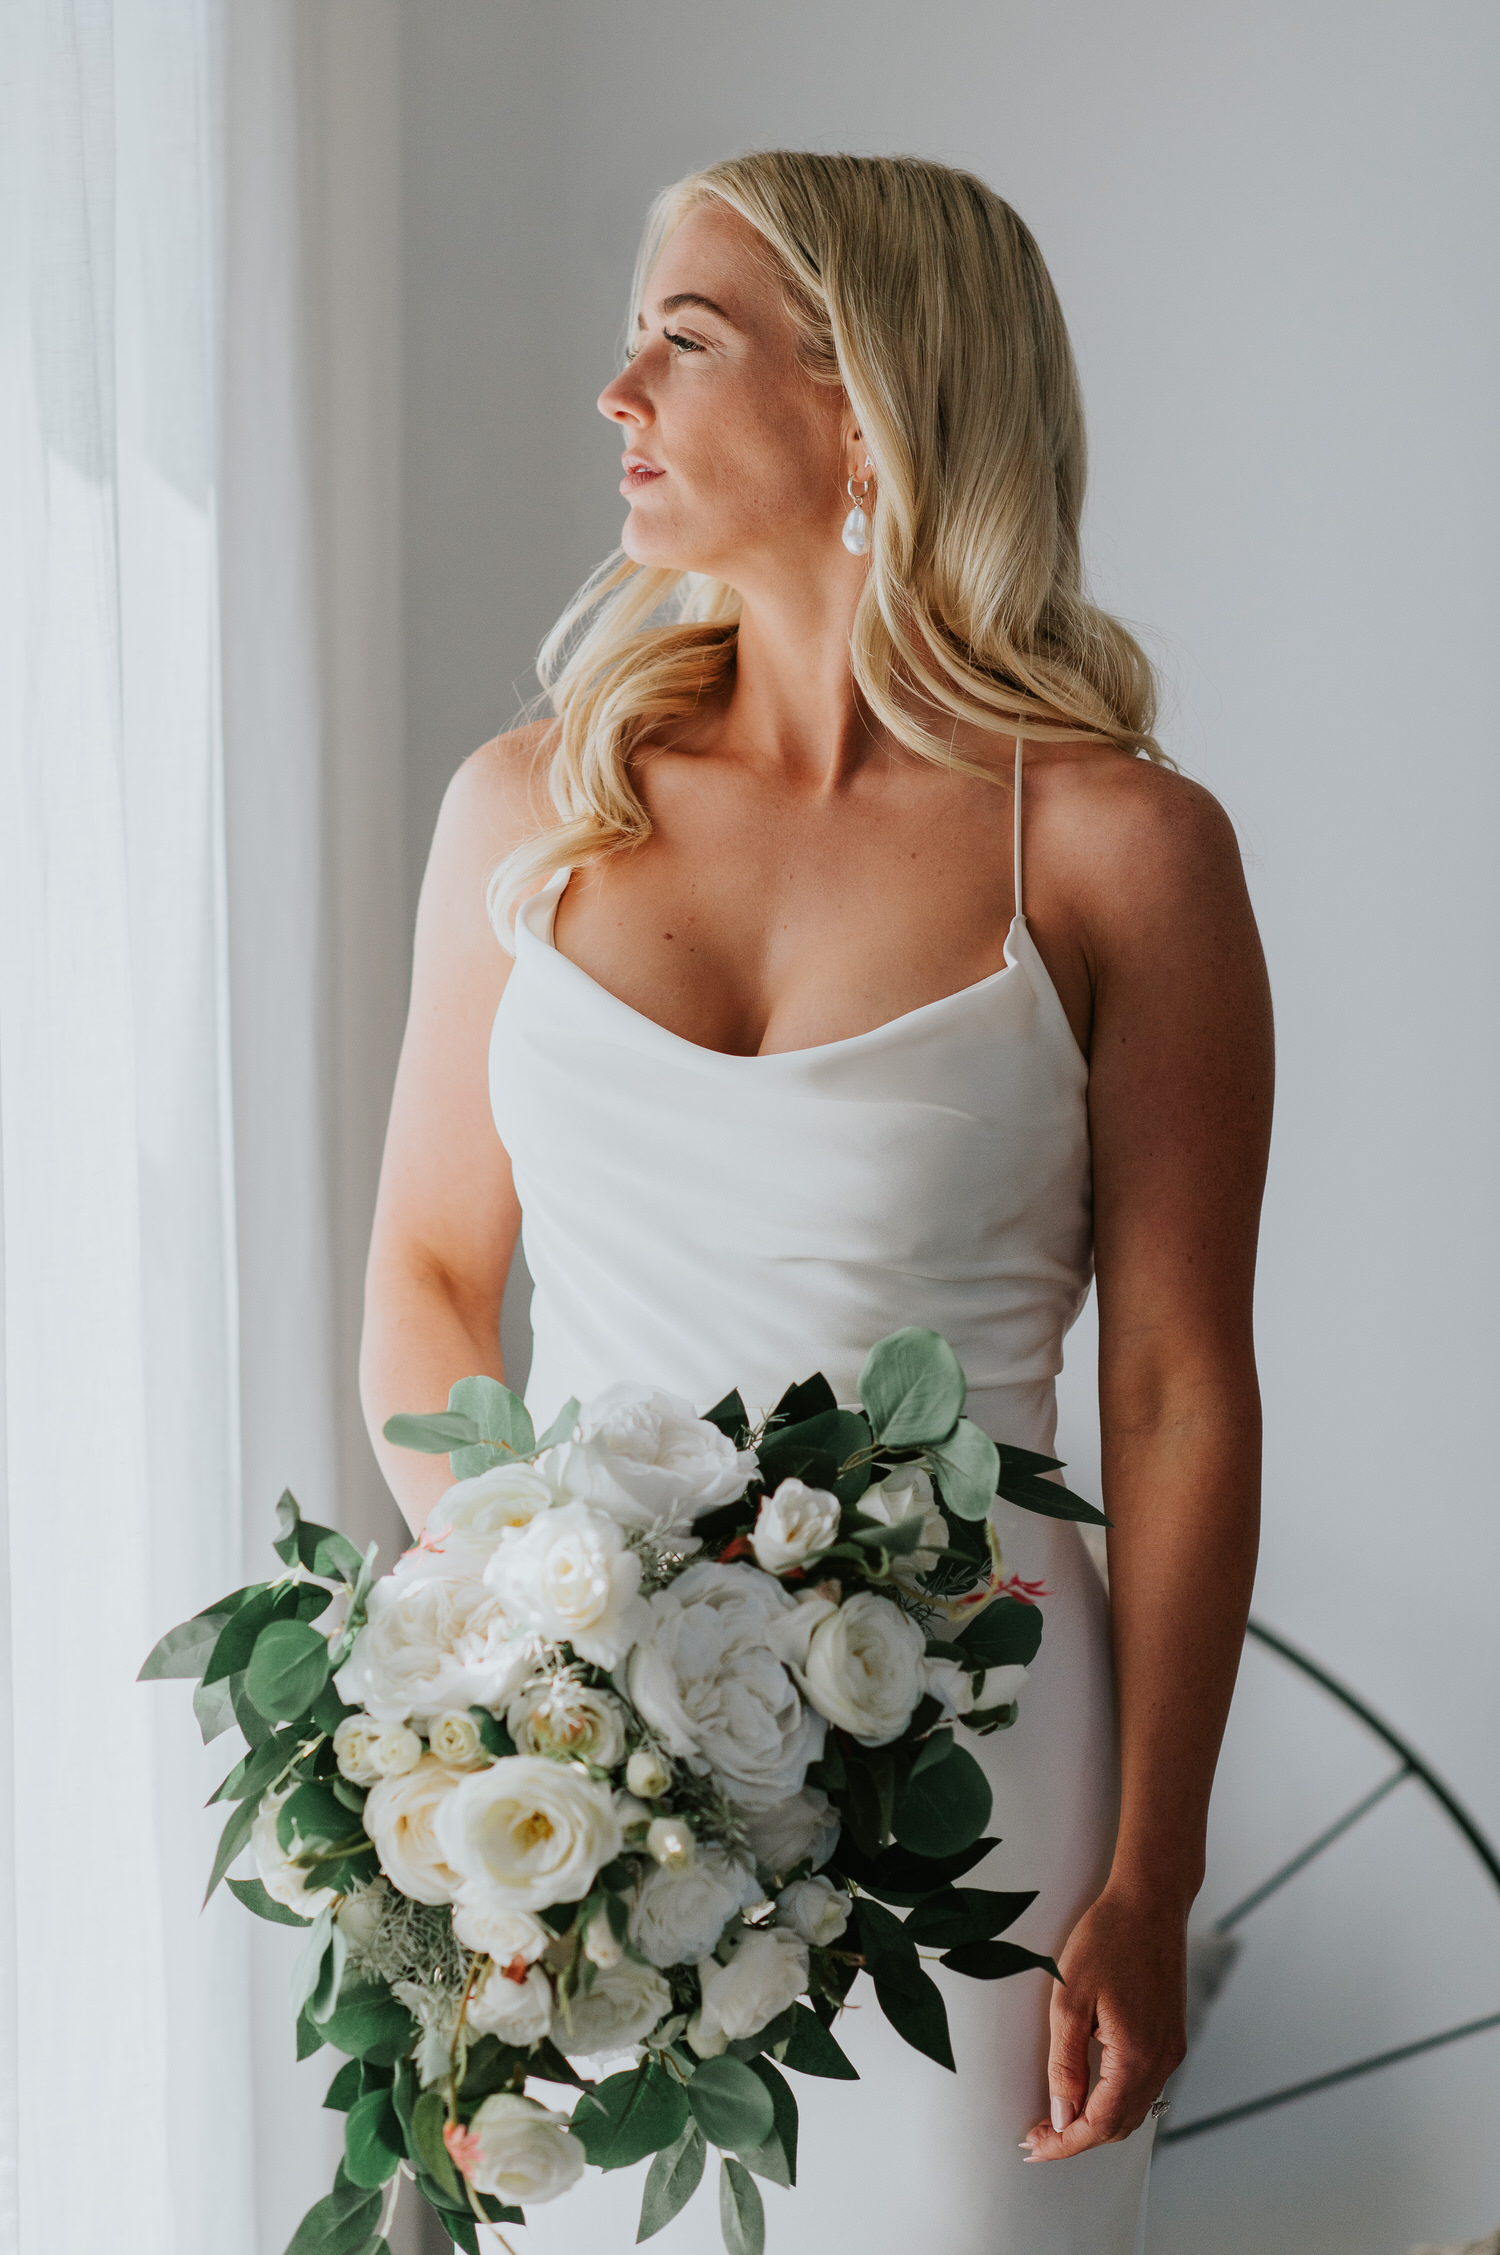 Mykonos wedding photographer: stunning bride looking out through the window holding bouquet in beautiful light.